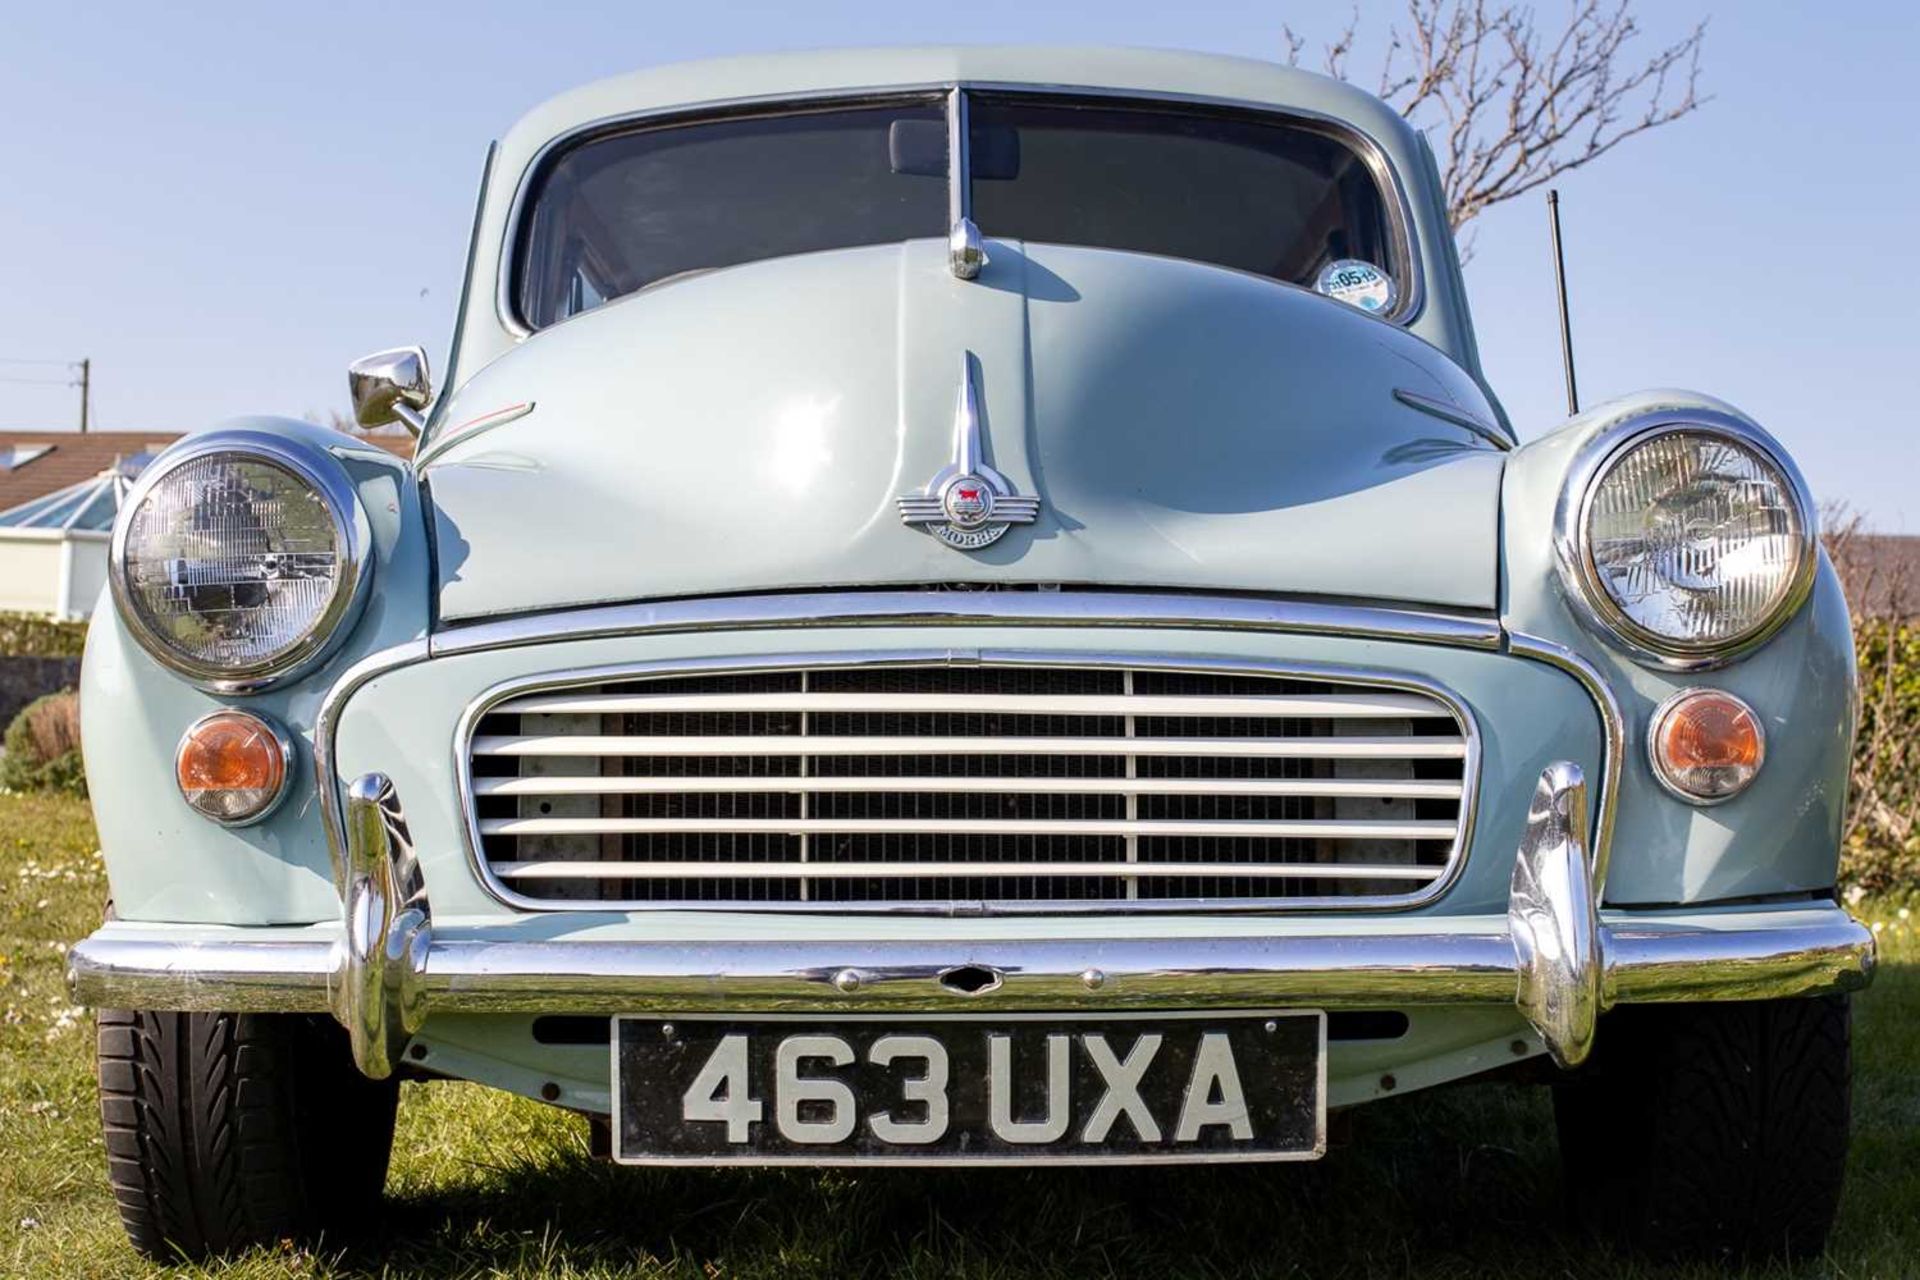 1956 Morris Minor Traveller Uprated with 1275cc engine  - Image 25 of 89